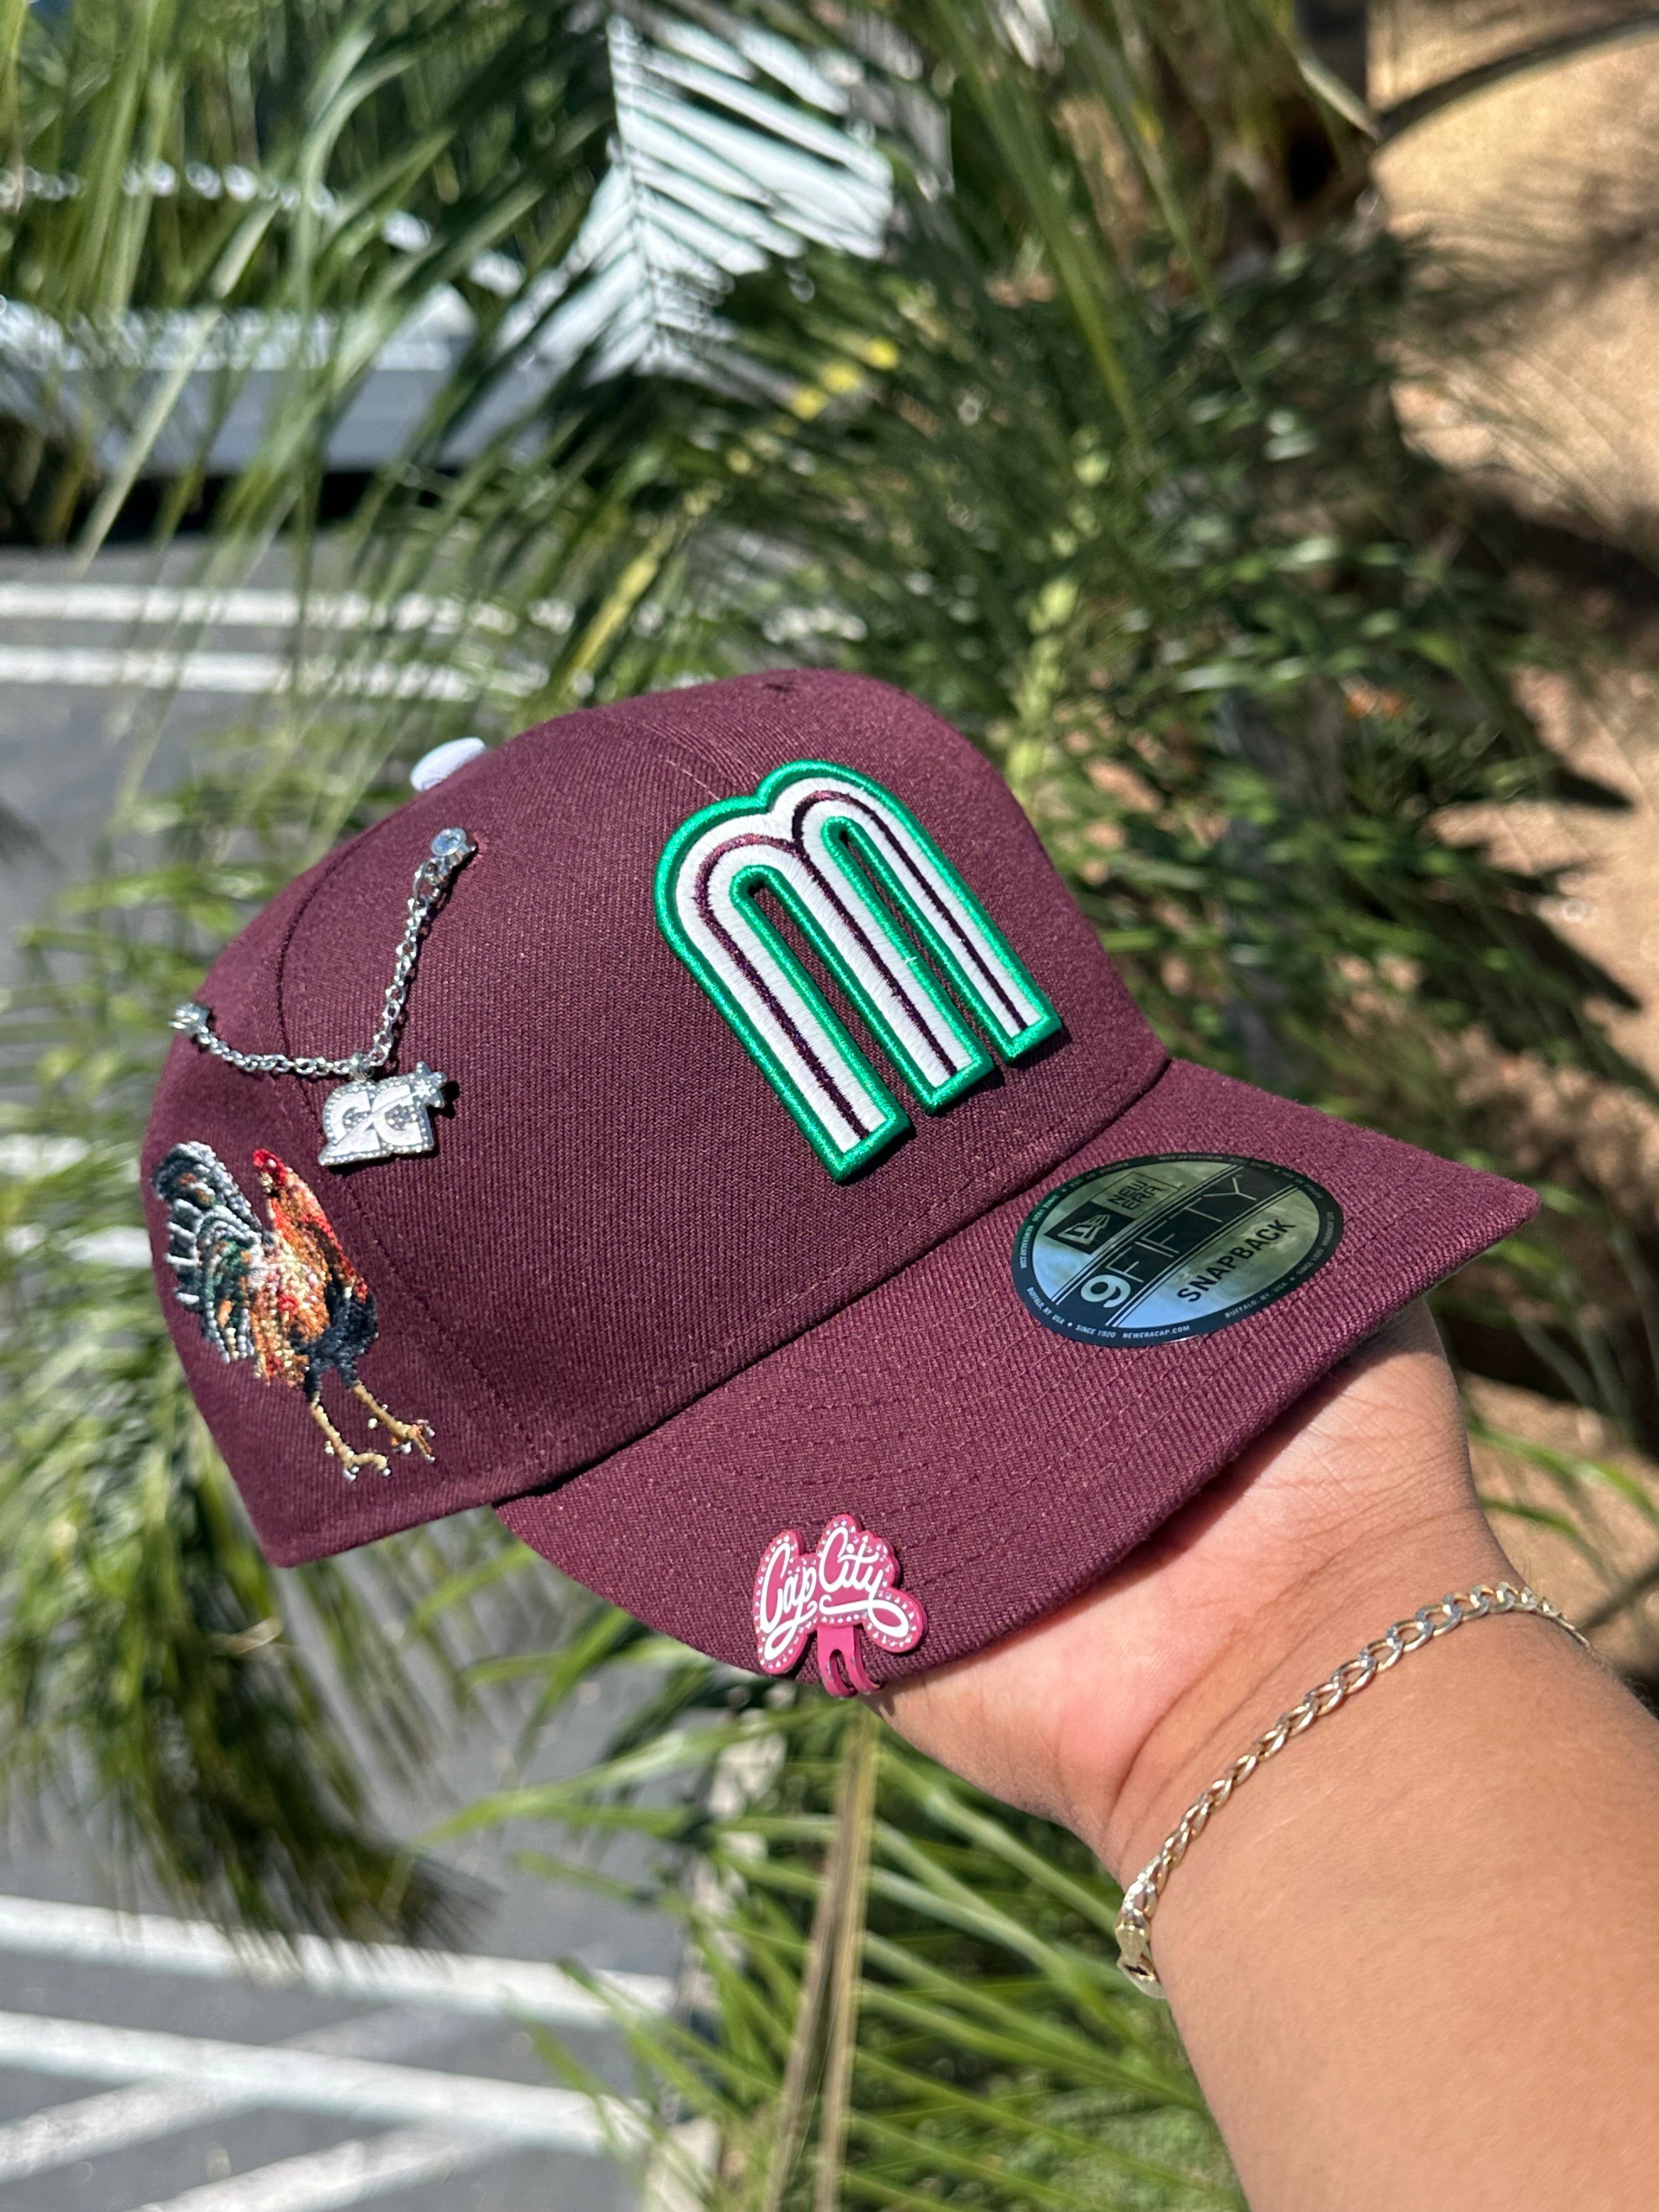 NEW ERA EXCLUSIVE 9FIFTY BURGUNDY MEXICO SNAPBACK W/ EL GALLO SIDE PATCH